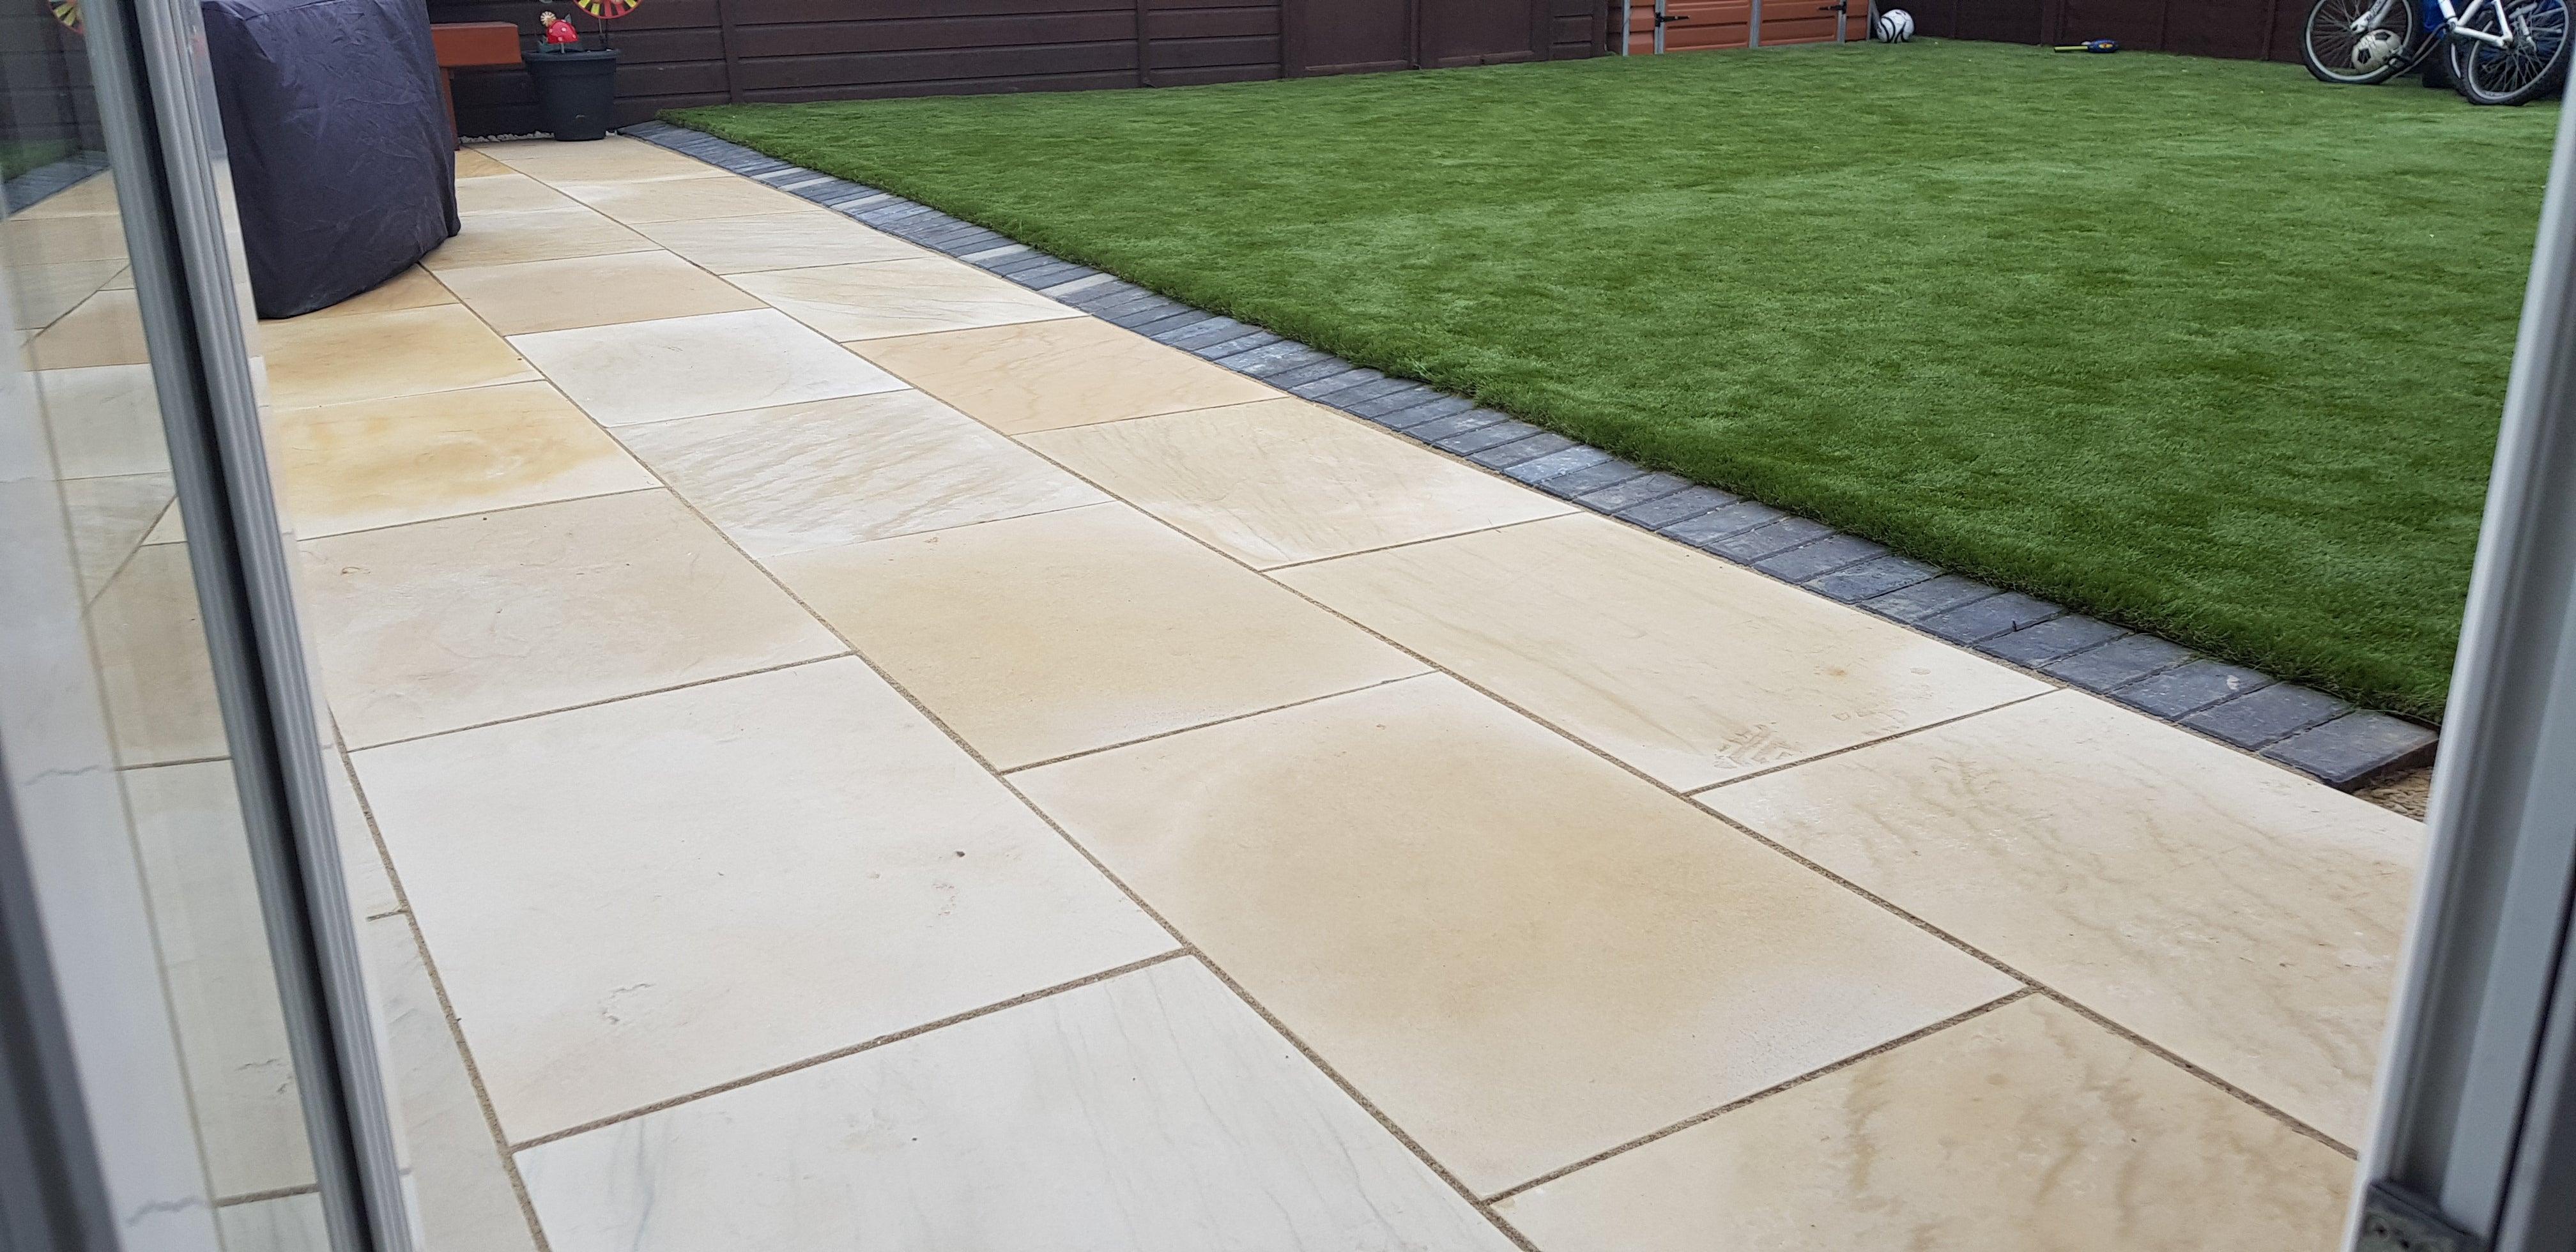 Fossil Mint Indian Sandstone Paving Slabs - Sawn & Honed - 900x600 - 20mm - Smooth Paving